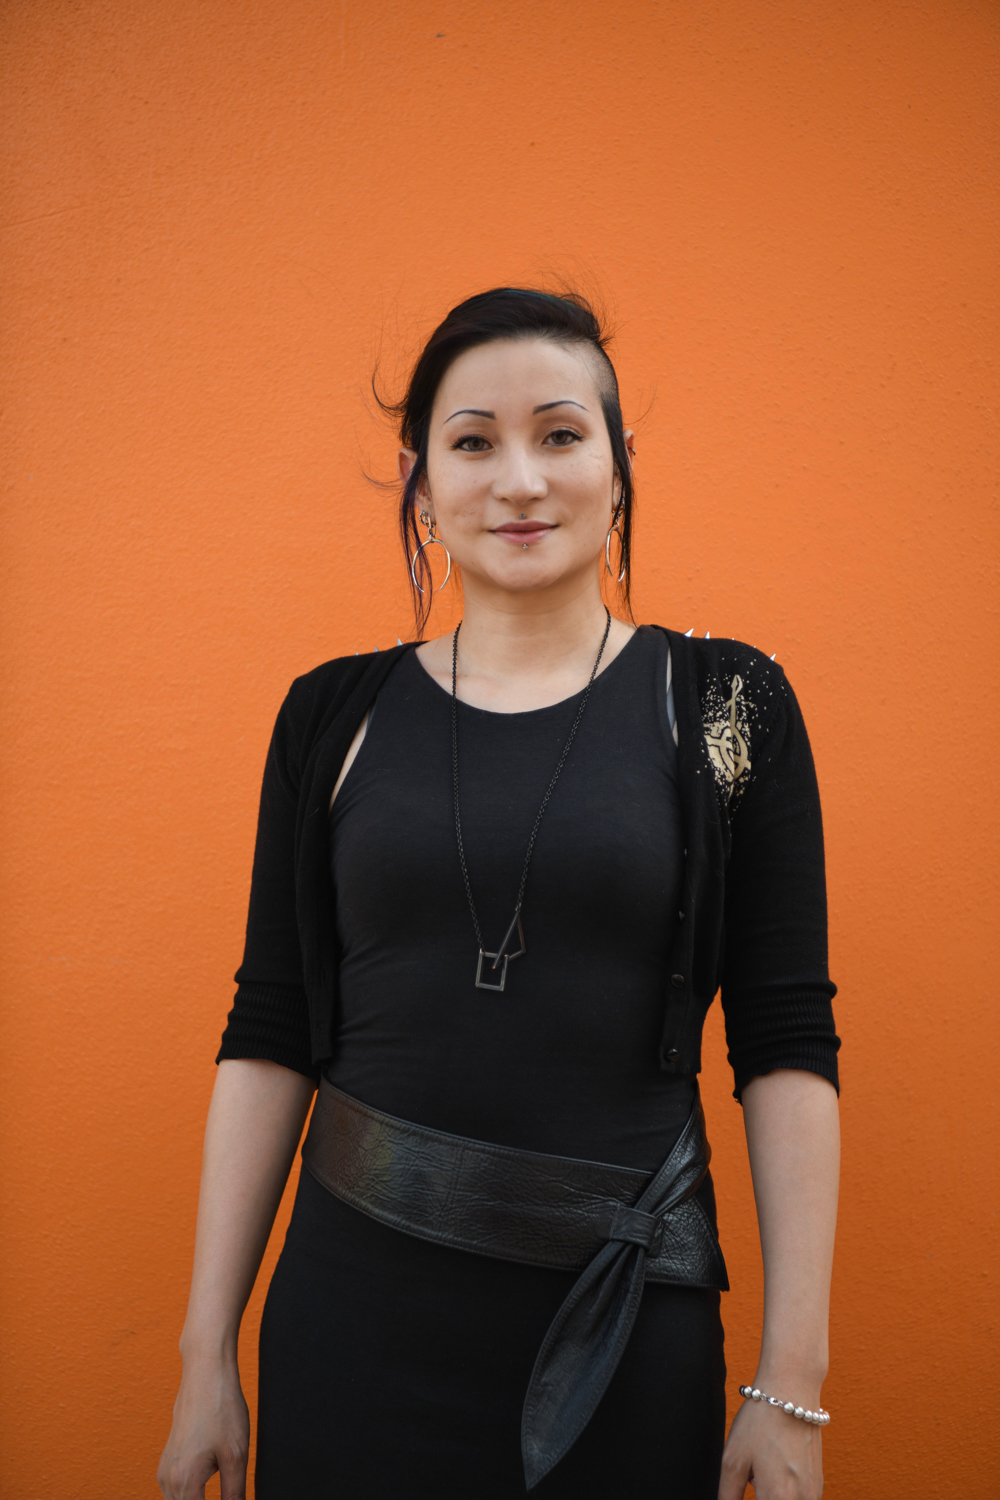 A photograph of Adele Aria standing in front of a bright orange wall. Adele has funky hair and is wearing black.